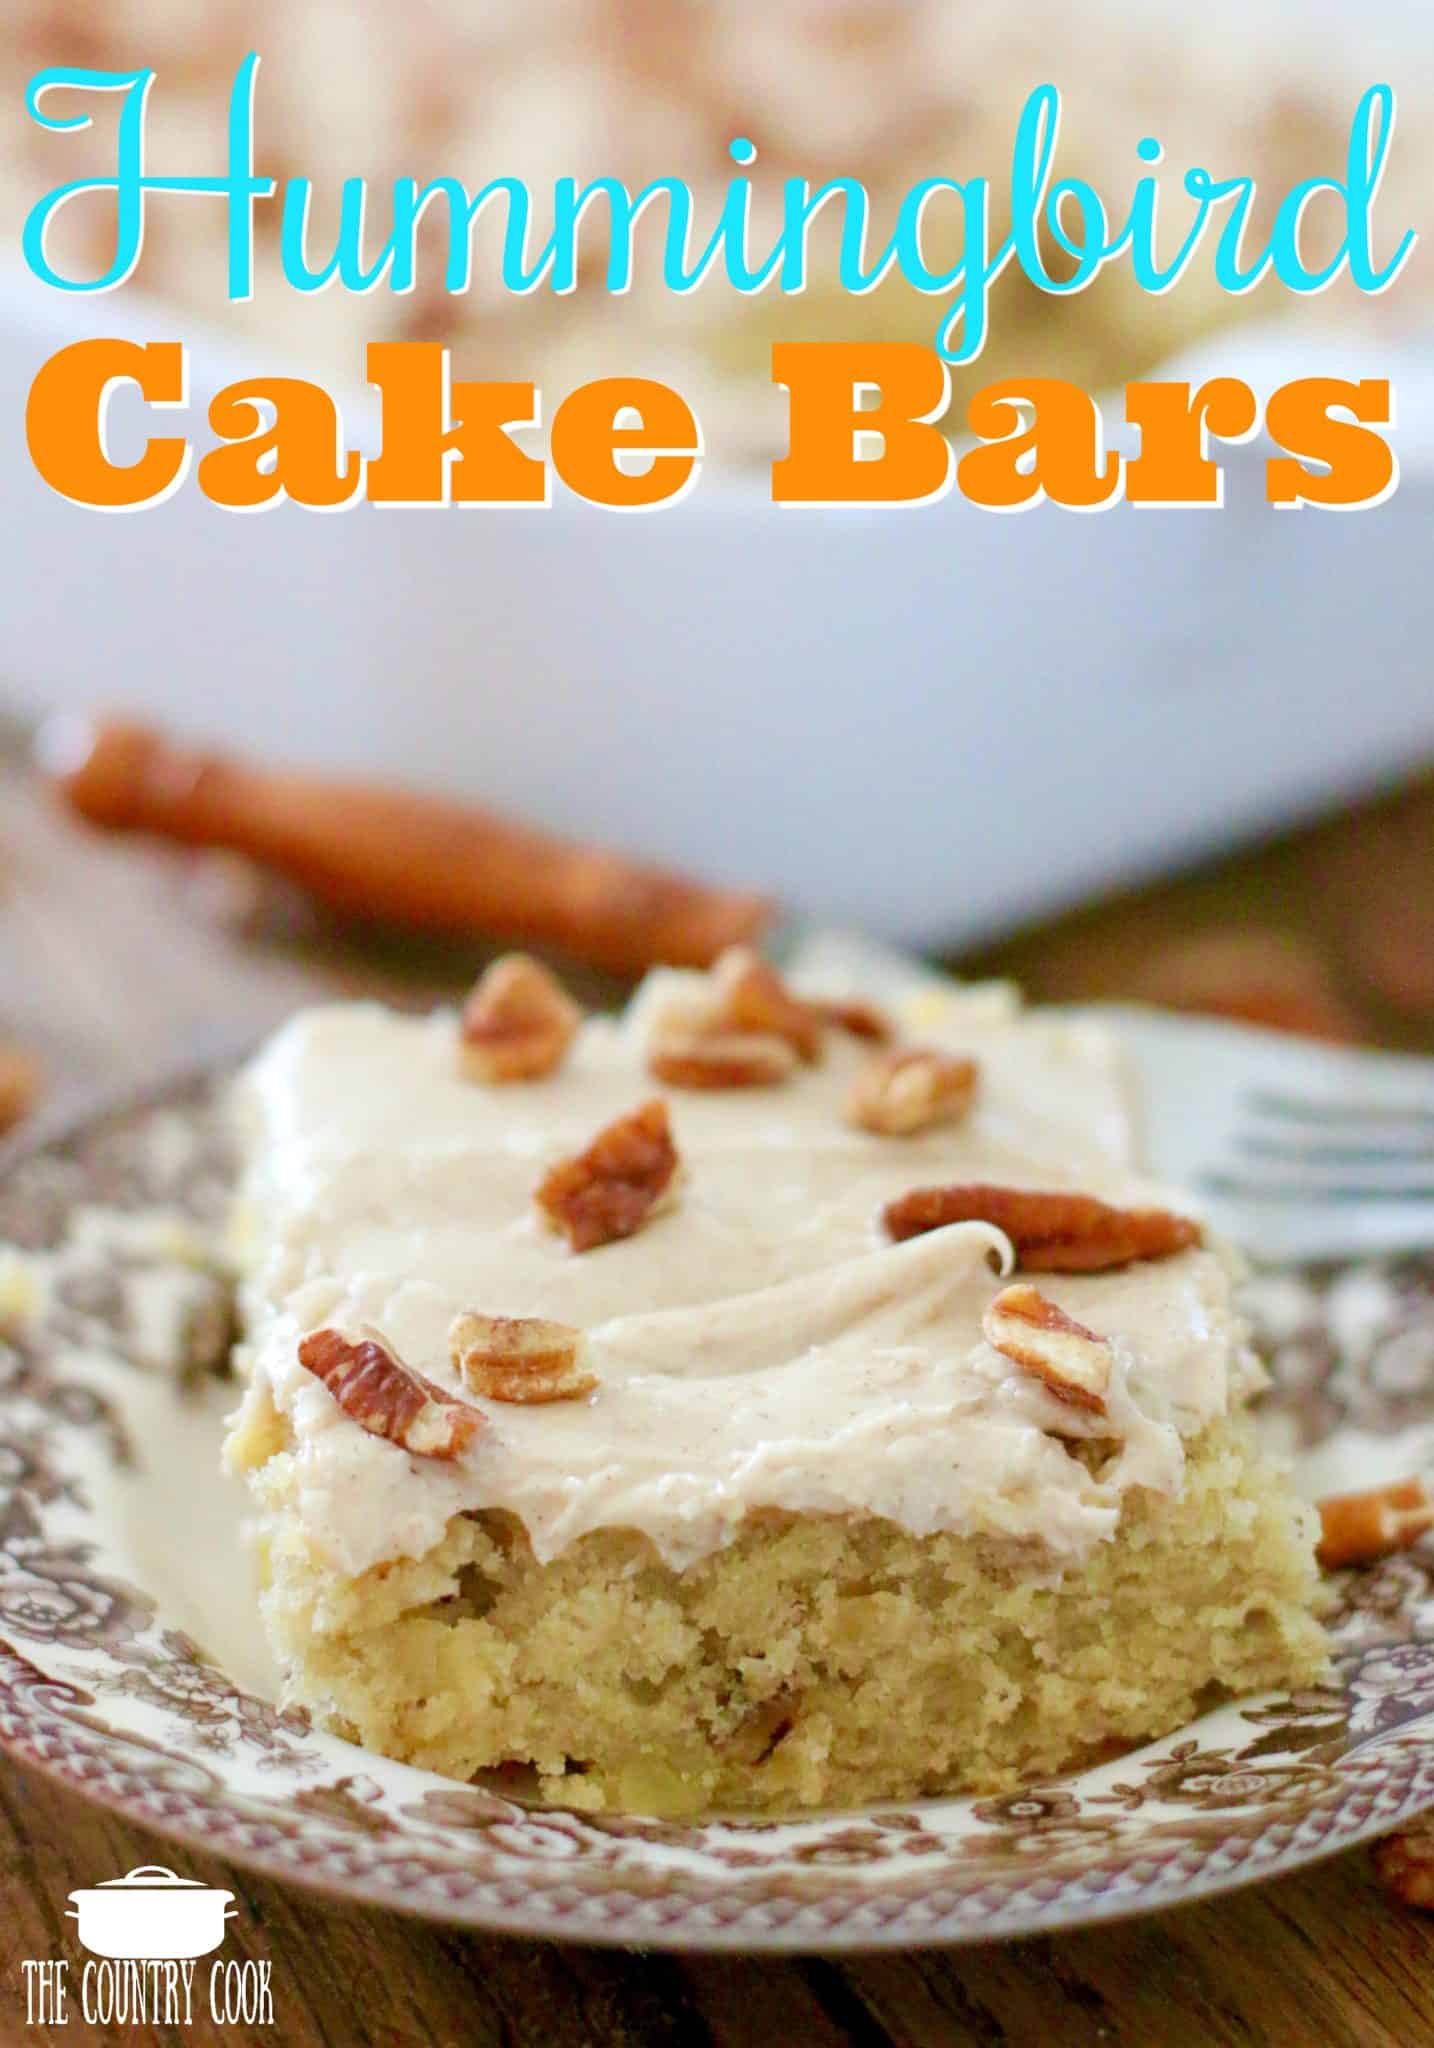 Hummingbird Cake Bars recipe at The Country Cook.